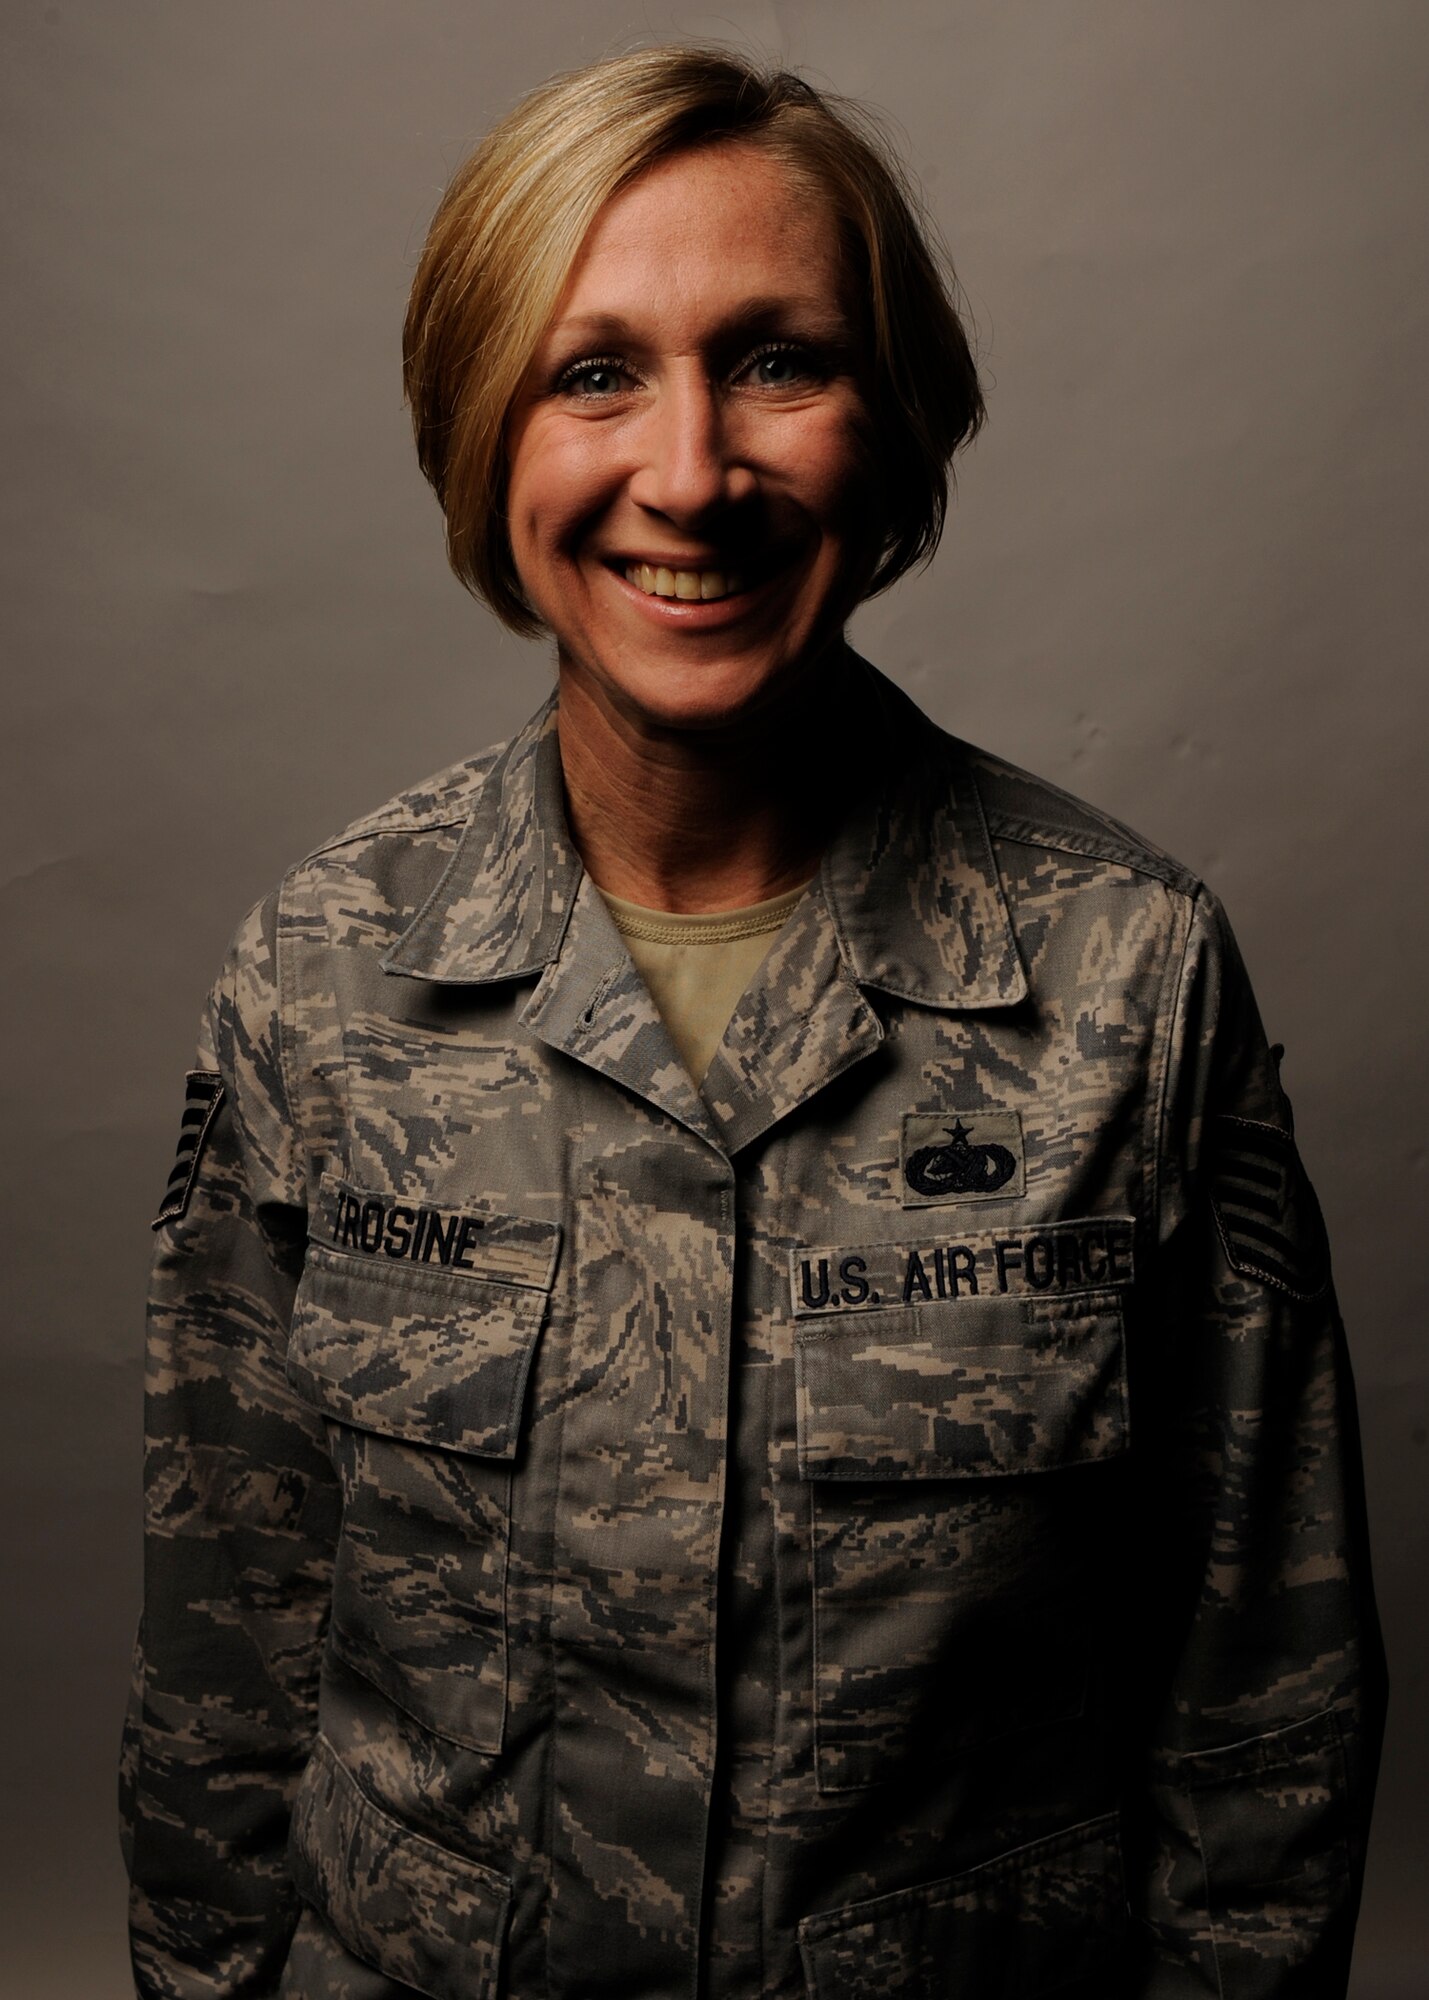 Tech. Sgt. Stacy Trosine, 92nd Logistics Readiness Squadron flight service center NCO in charge, has been selected as one of four Fairchild Air Force Base Women to be recognized during Women’s History Month. Trosine was selected based on her mentoring and physical fitness, and in particular her passion for running marathons (U.S. Air Force photo/Airman 1st Class Taylor Bourgeous)